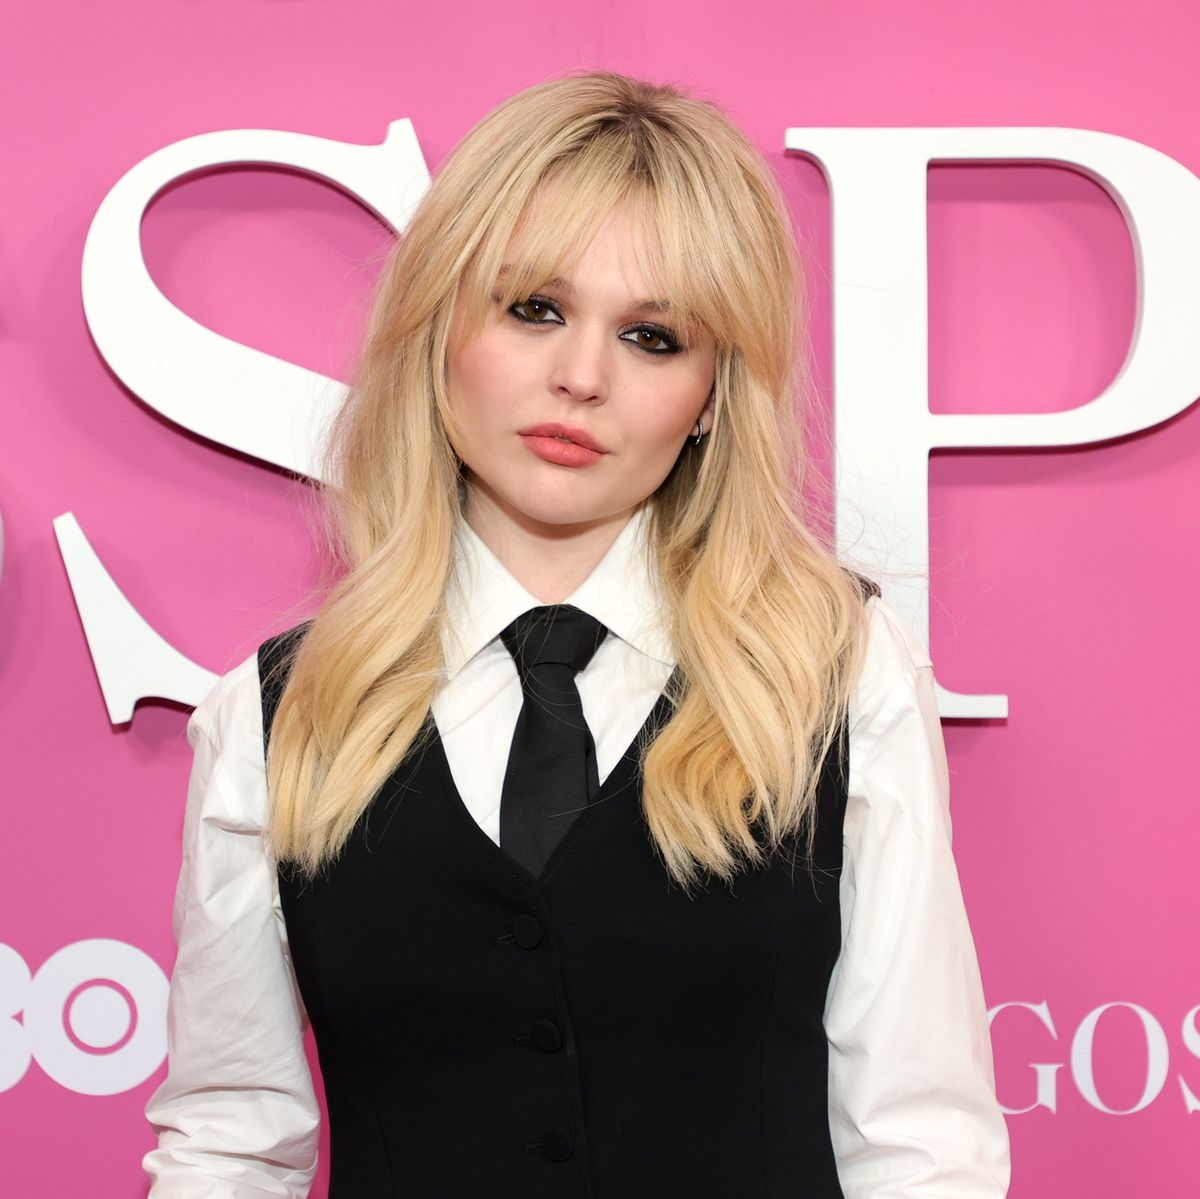 https://hips.hearstapps.com/hmg-prod/images/emily-alyn-lind-attends-the-gossip-girl-new-york-premiere-news-photo-1625701689.jpg?crop=0.652xw:1.00xh;0.175xw,0&resize=1200:*